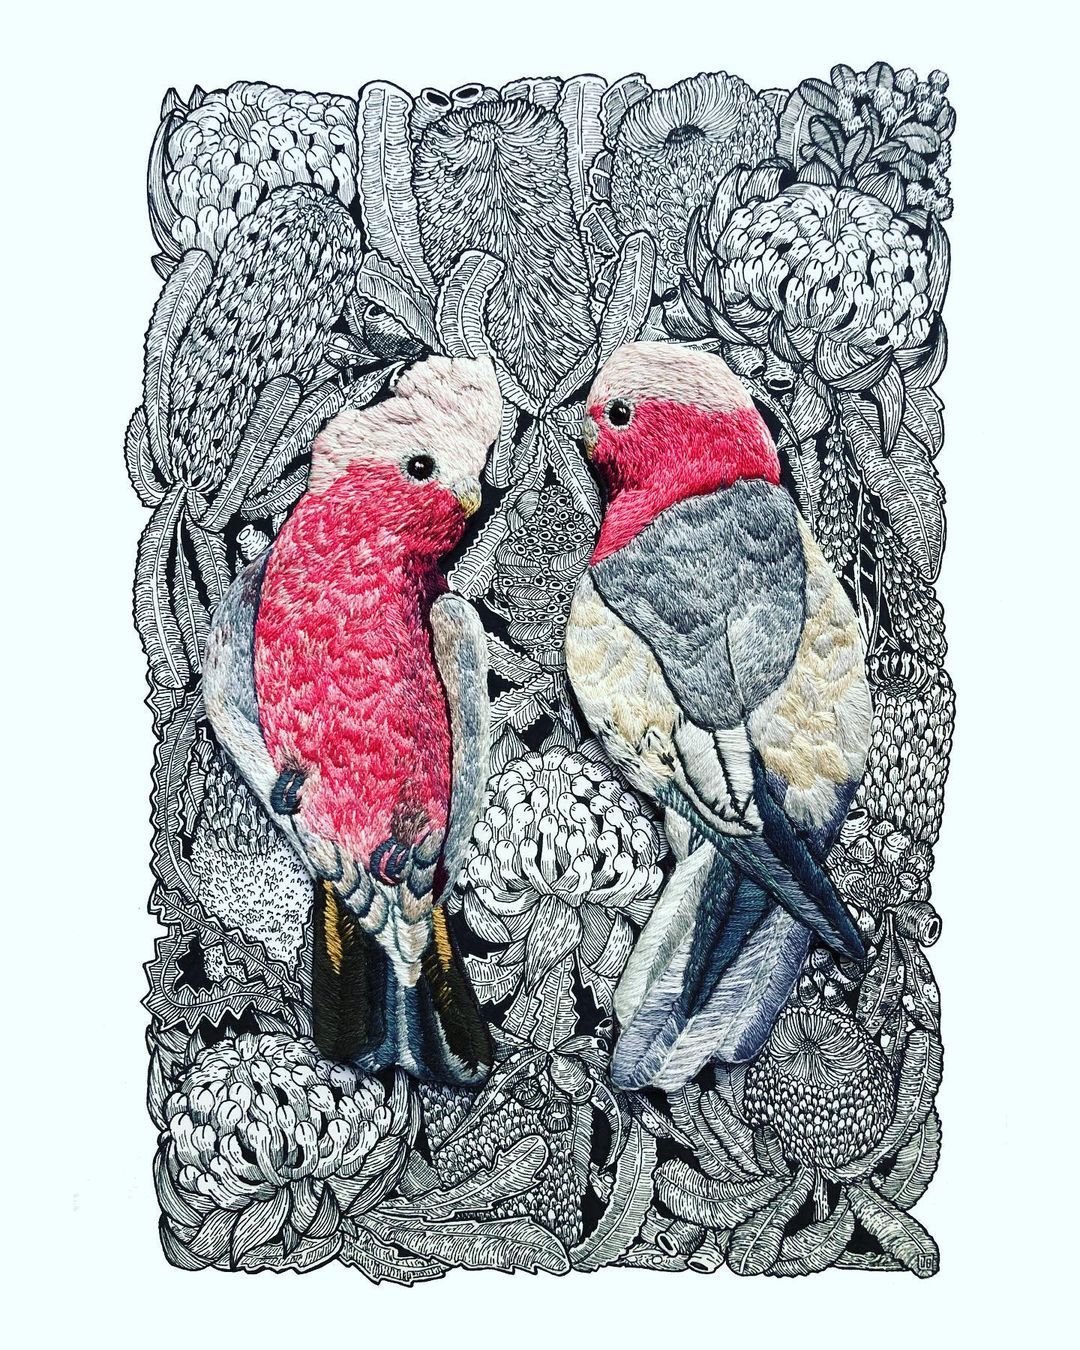 Embroidery and Drawing by Jack Buckley